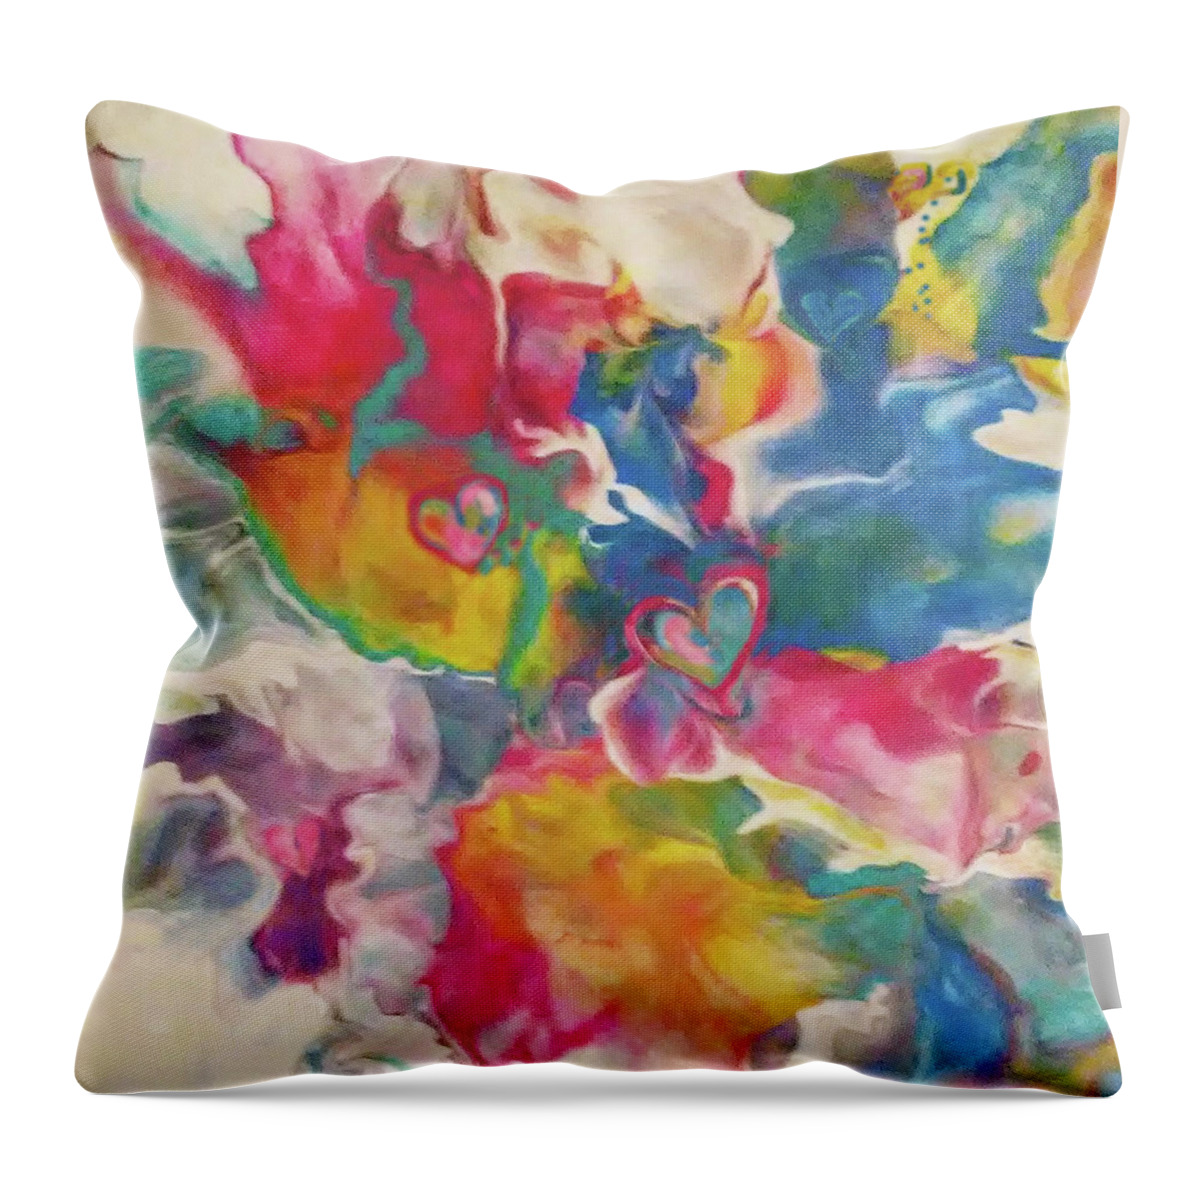 Colorful Abstract Acrylic Hearts Throw Pillow featuring the painting Sound Of Sun by Deborah Erlandson